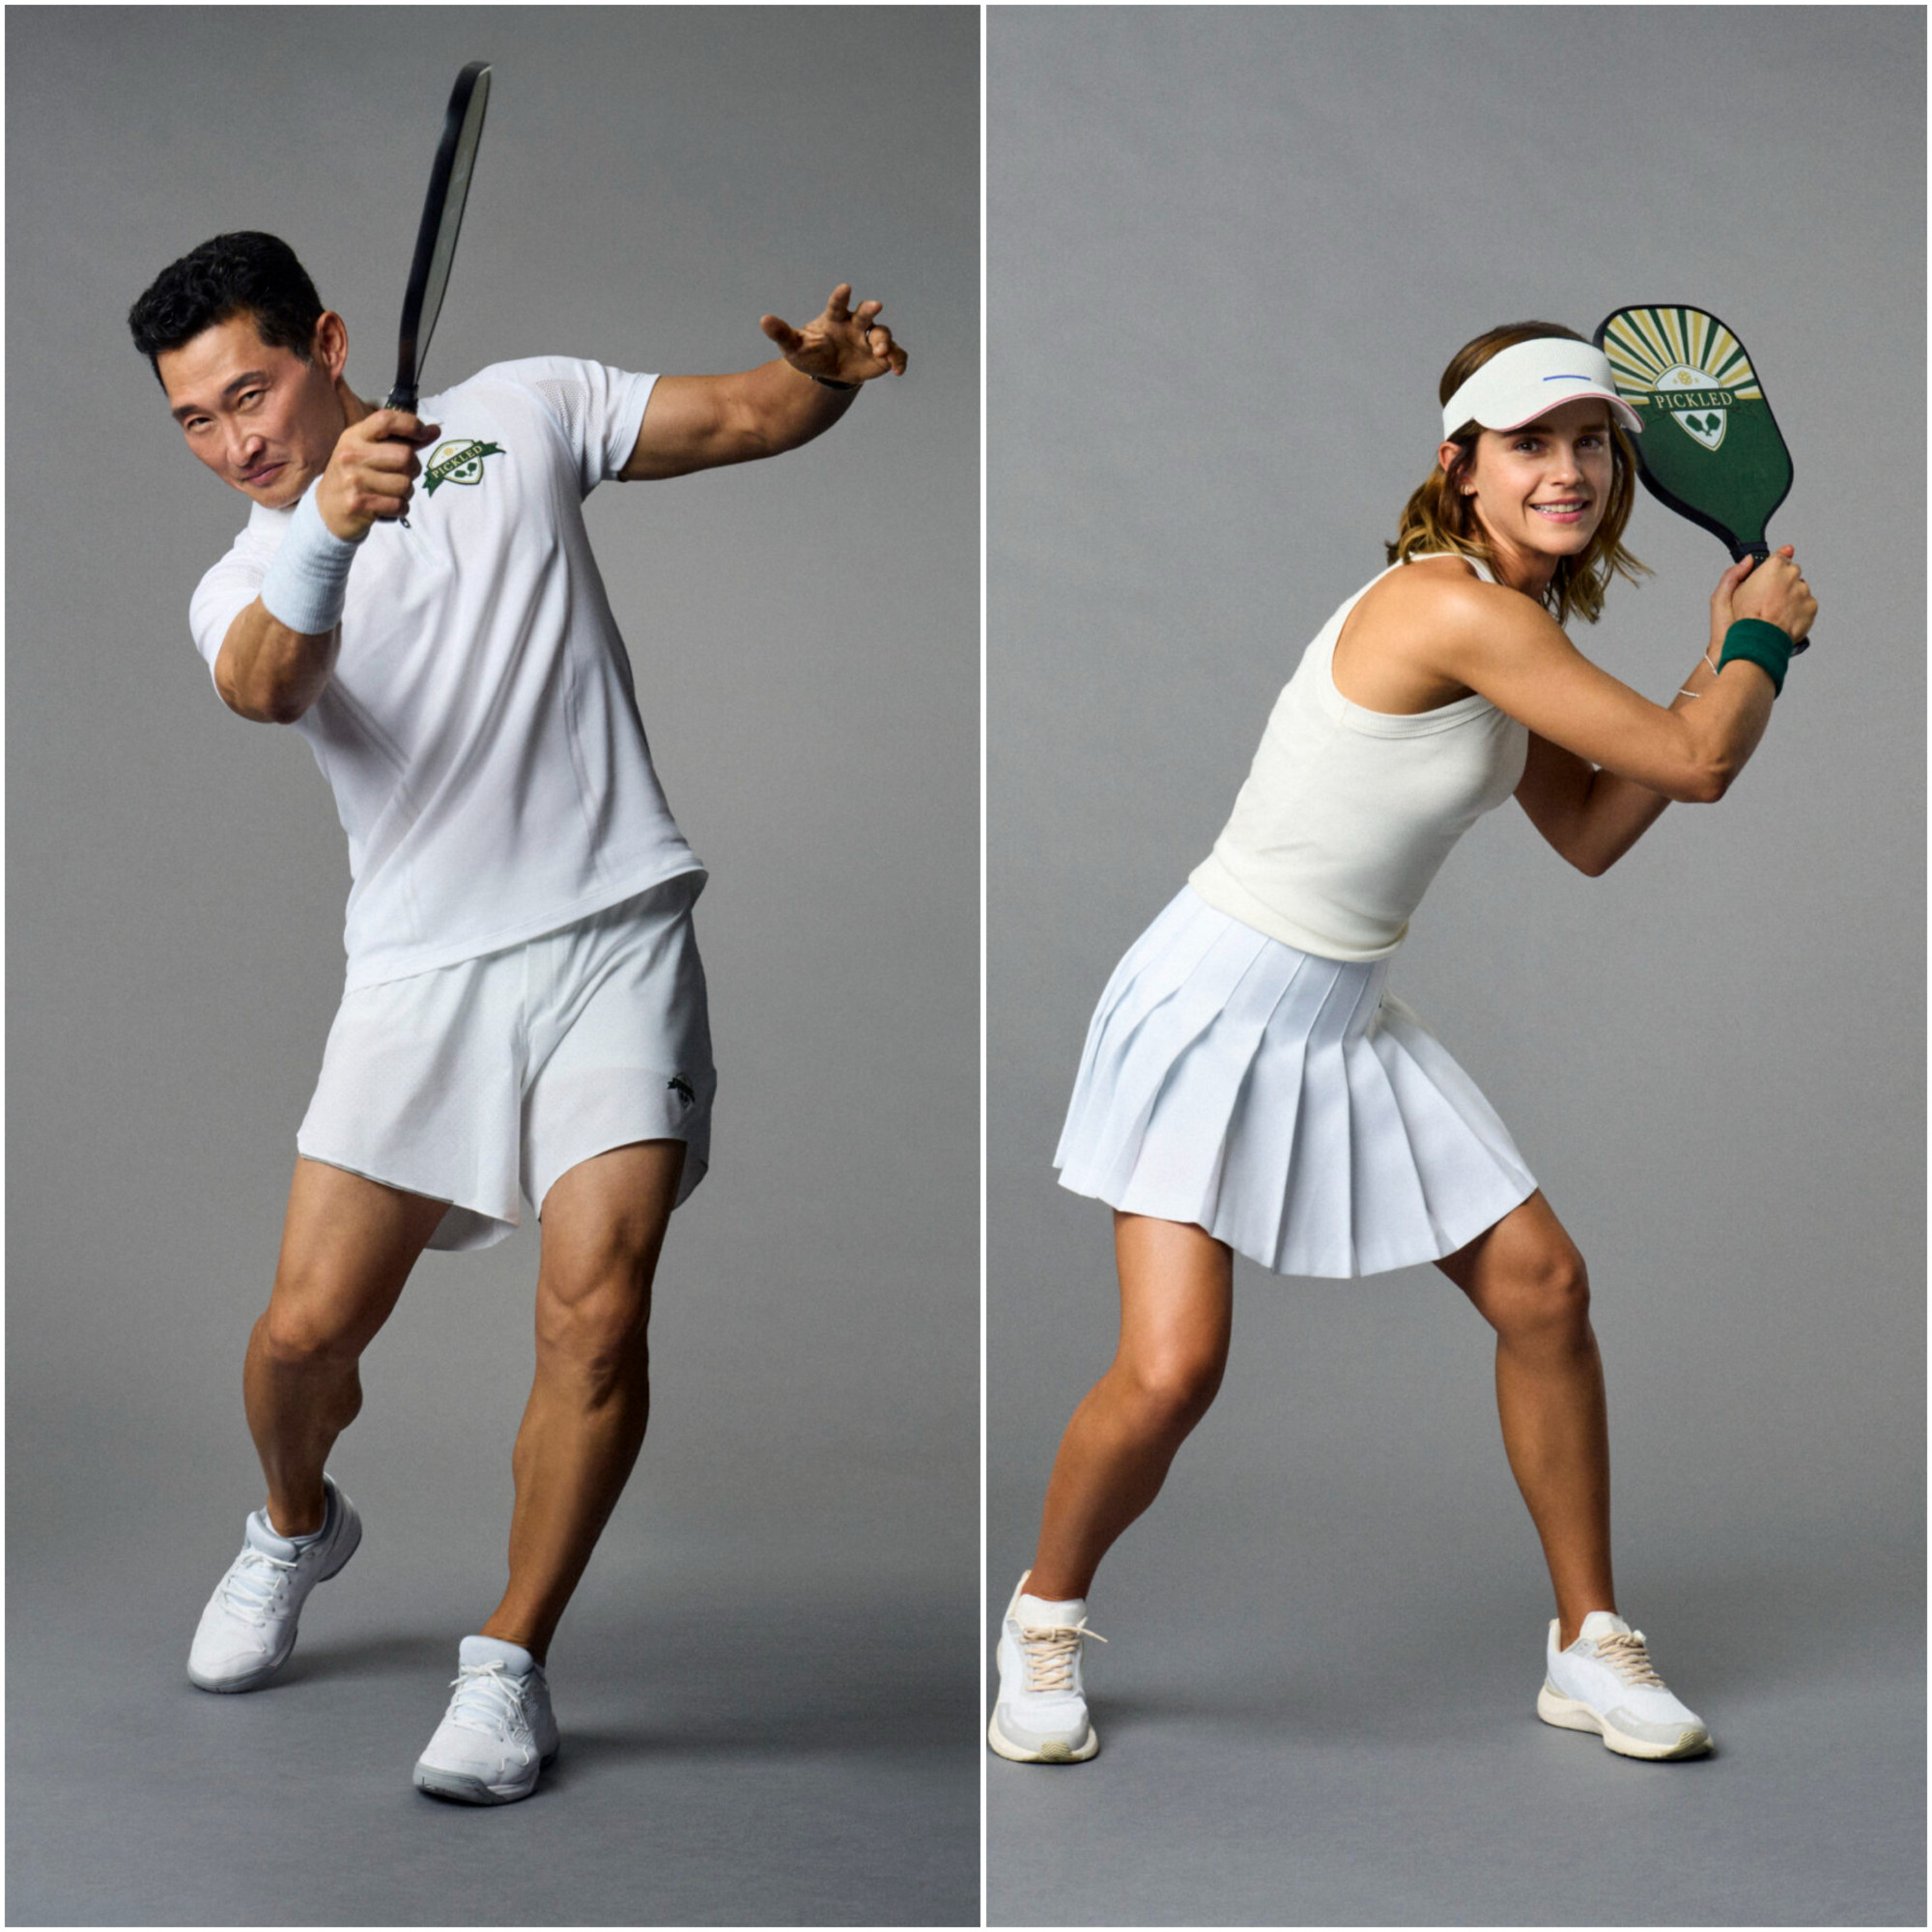 Pickled by CBS, hosted by Stephen Colbert and featuring Daniel Dae Kim and Emma Watson playing pickleball. Photo: CBS